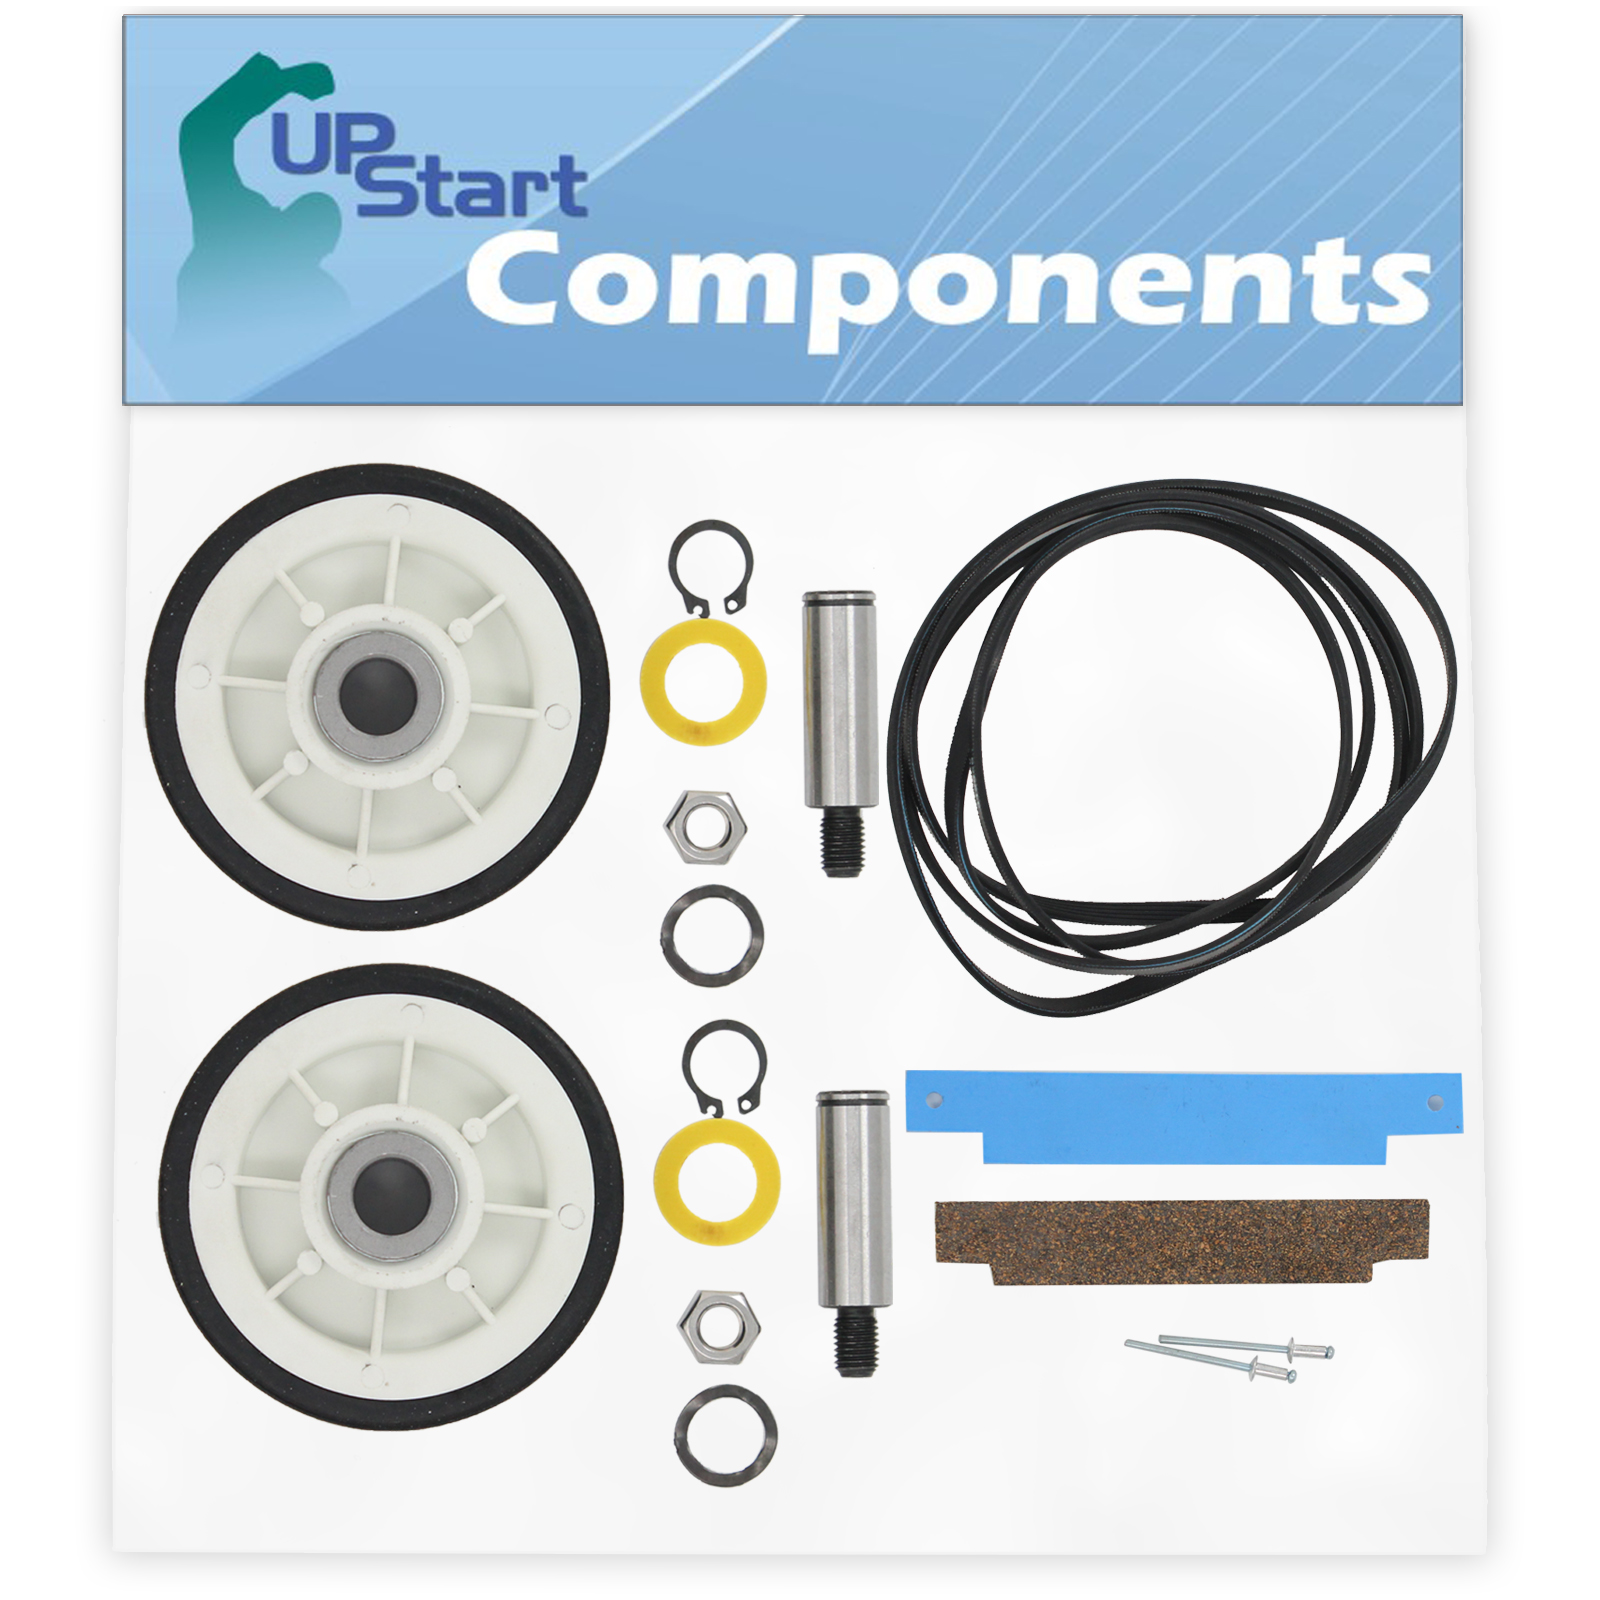 UpStart Components 2 12001541 Drum Support Roller Kit & 2 306508 Bearing Kit & 1 312959 Belt Replacement for Maytag LDE8404ACE Dryer